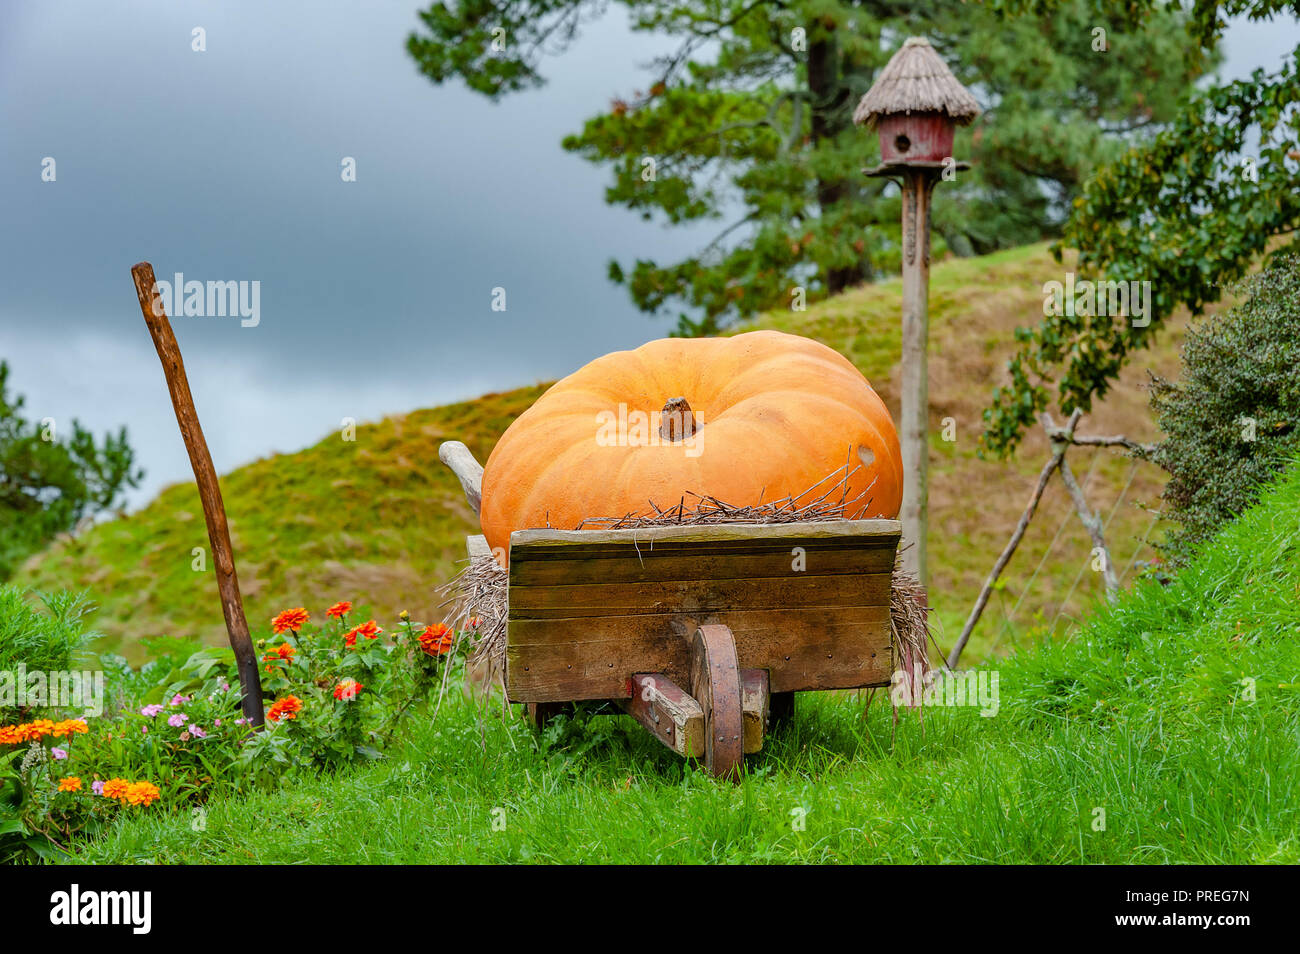 Old wooden wheelbarrow carrying a giant pumpkin lays on a grassland with large trees and a cute bird house in the background. Stock Photo